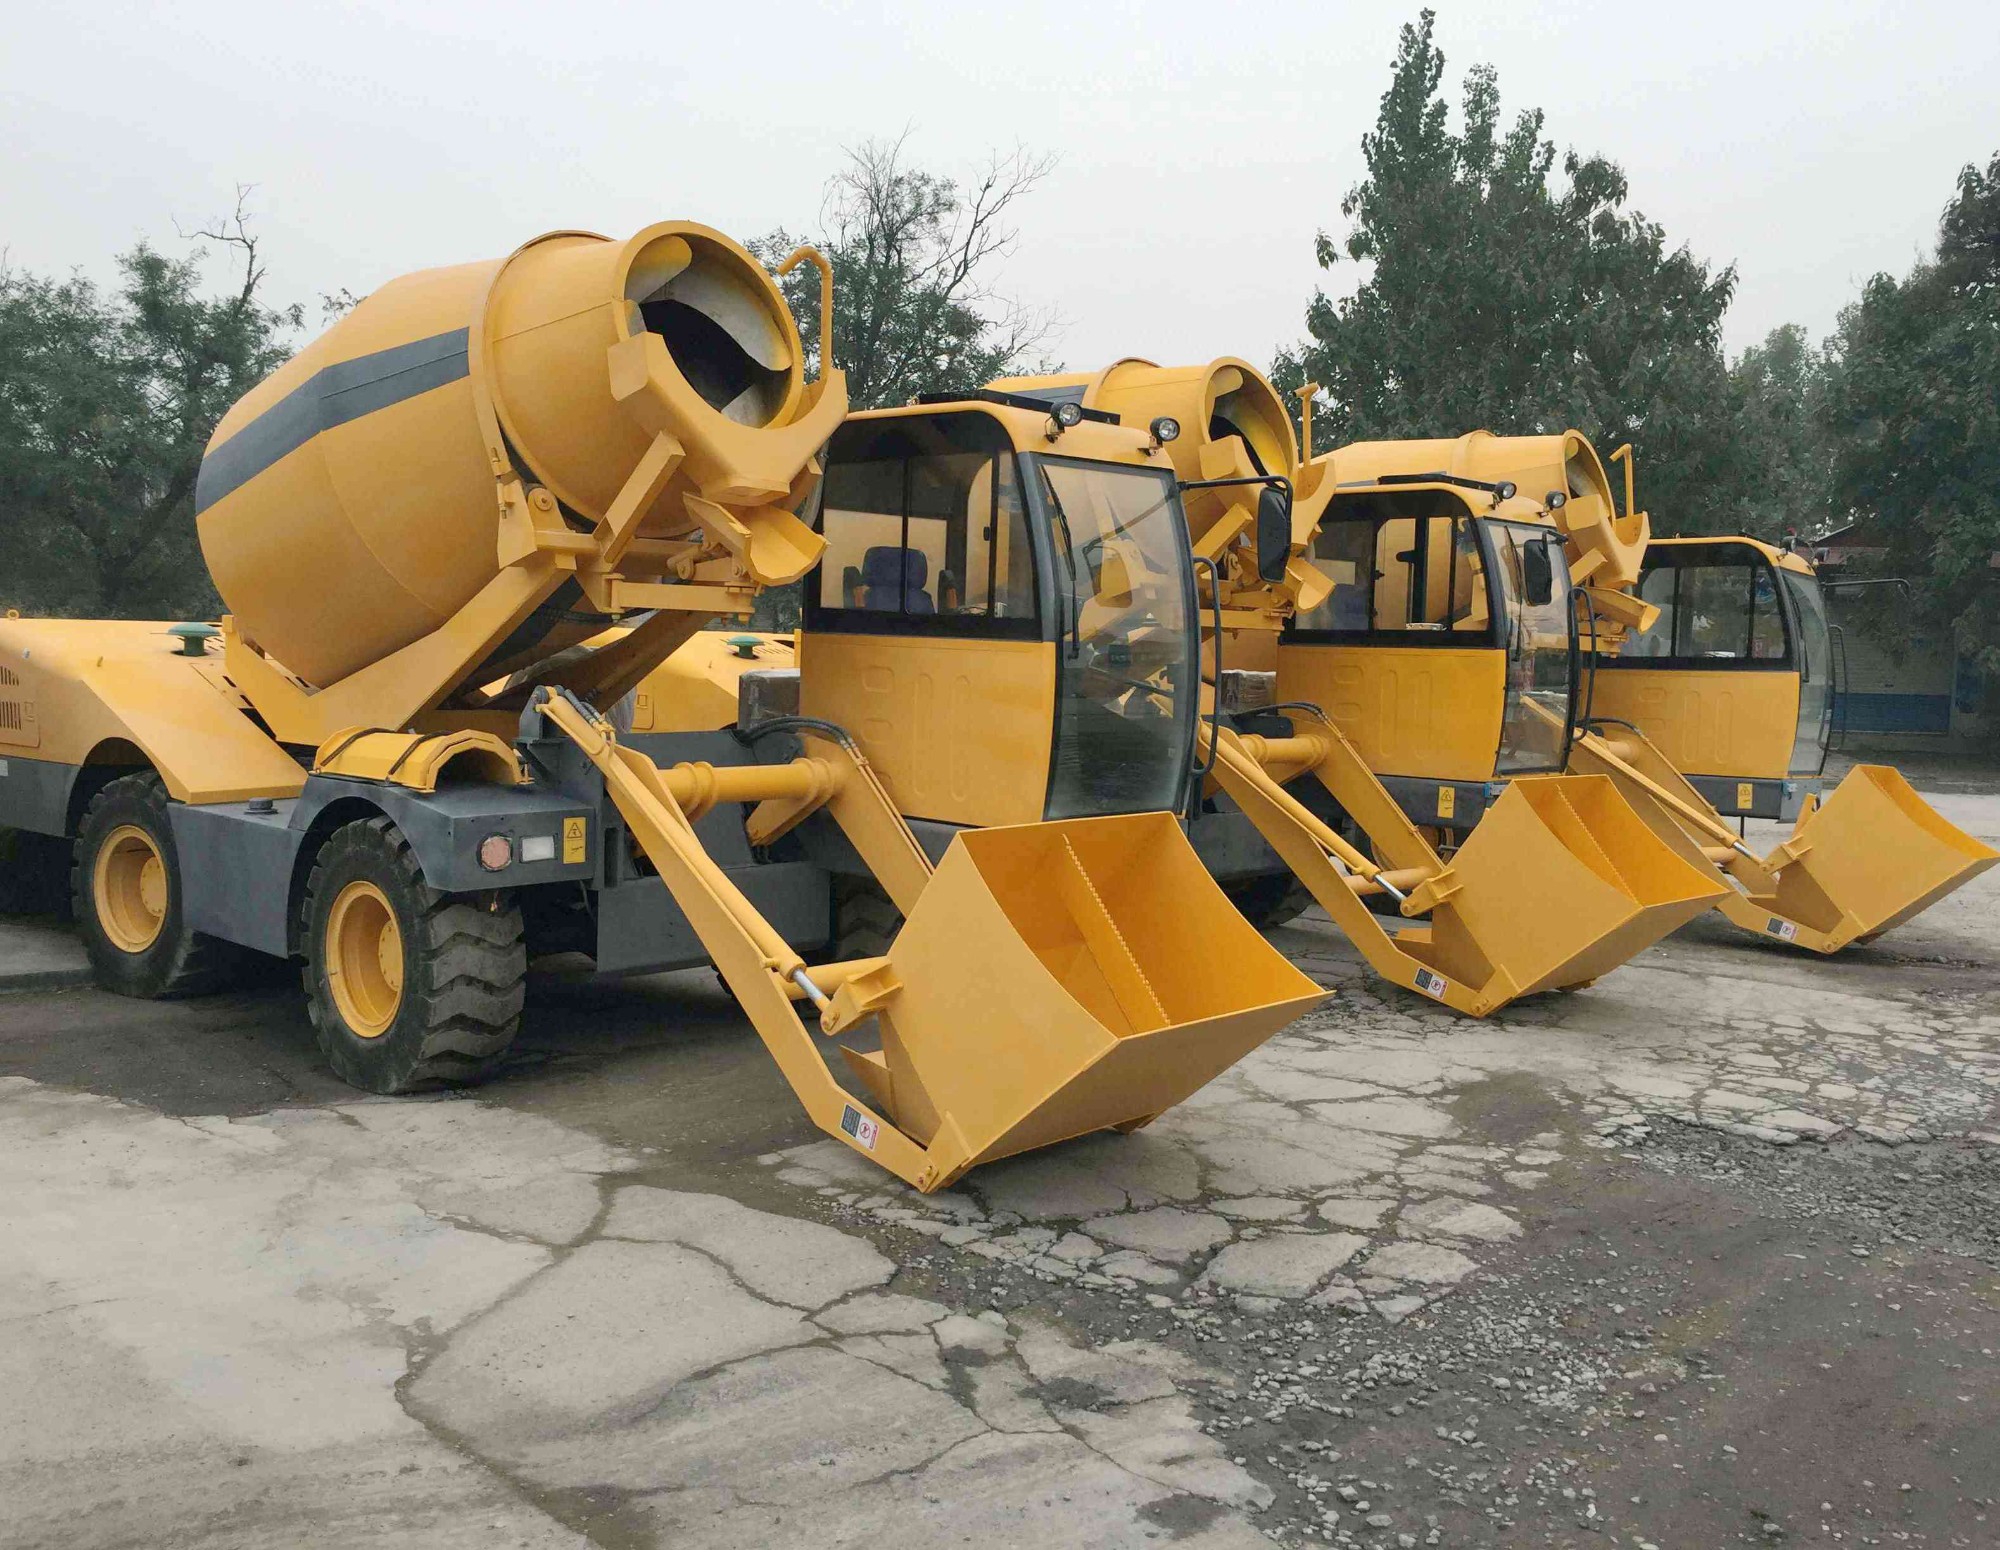 Sales HANK 3.5 Cubic Meters Self Propelled Hydraulic Mobile Self Loading Concrete Mixer Truck Price, Buy HANK 3.5 Cubic Meters Self Propelled Hydraulic Mobile Self Loading Concrete Mixer Truck Price, HANK 3.5 Cubic Meters Self Propelled Hydraulic Mobile Self Loading Concrete Mixer Truck Price Factory, HANK 3.5 Cubic Meters Self Propelled Hydraulic Mobile Self Loading Concrete Mixer Truck Price Brands